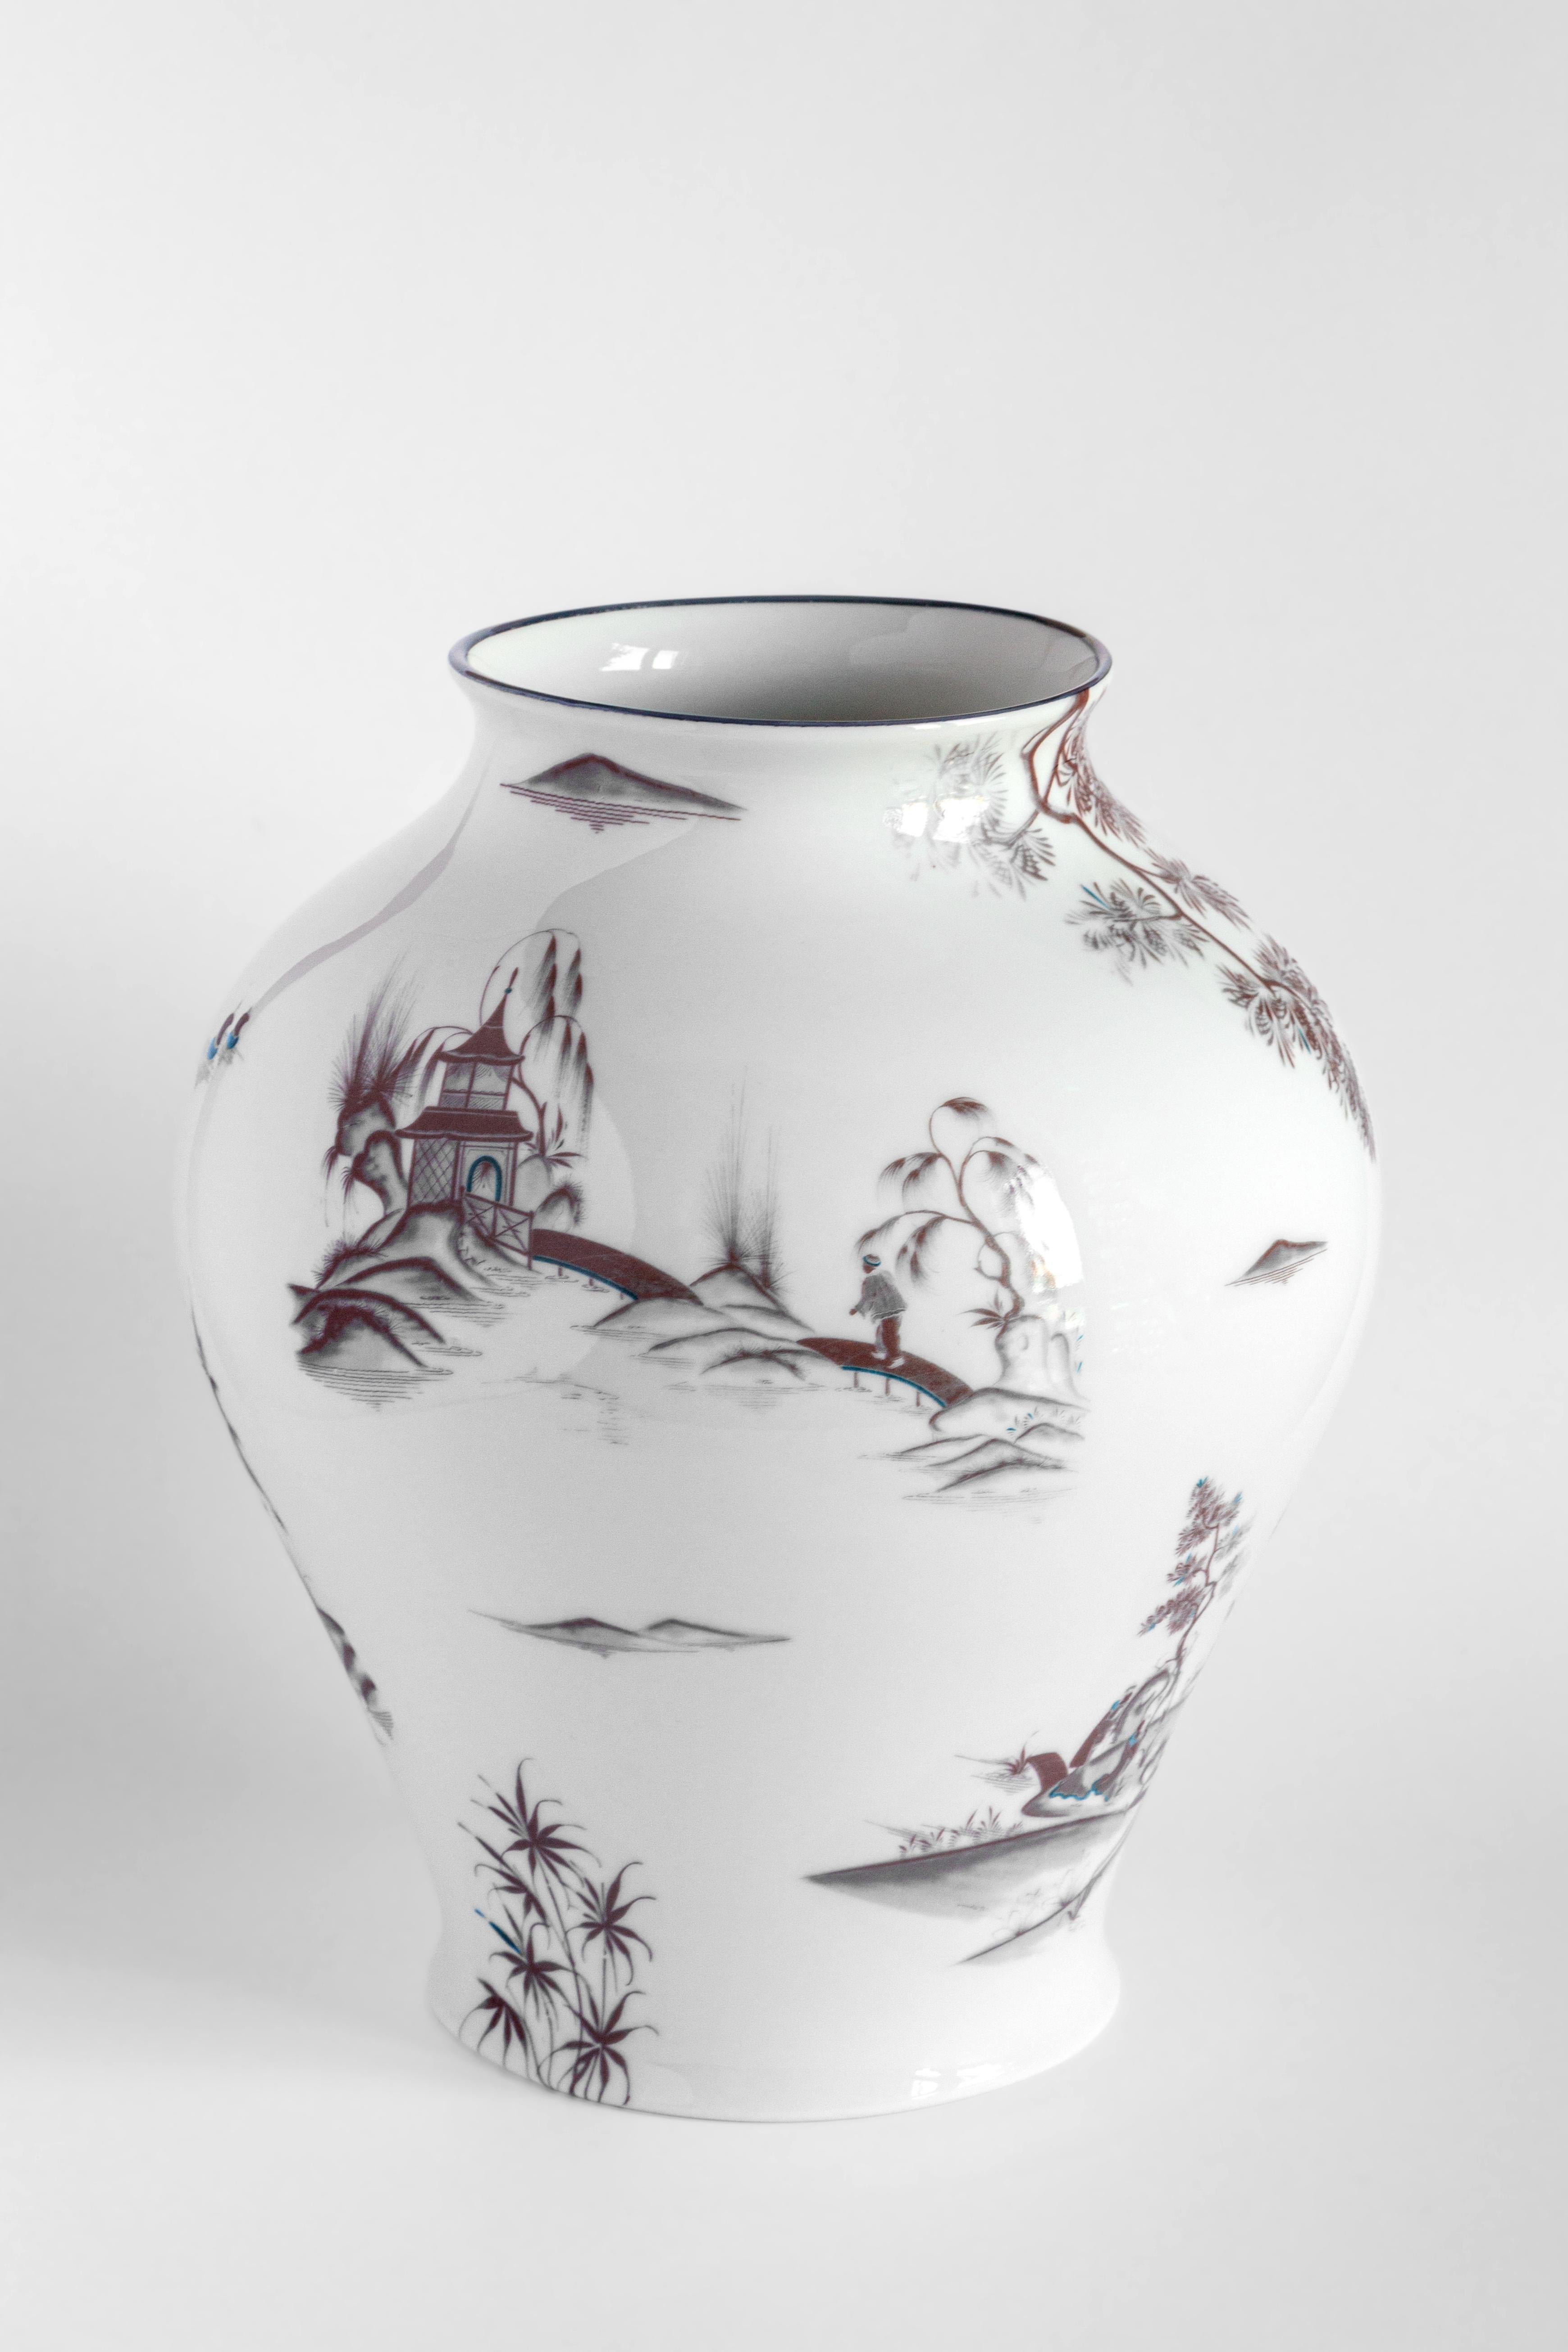 The Classic design of this porcelain vase comes back to life with retro decorations with a contemporary flavor. Natsumi vase evoke dream-like images of Japanese landscapes. Rendered in the Imari tradition, the vase's color palette of reddish-orange